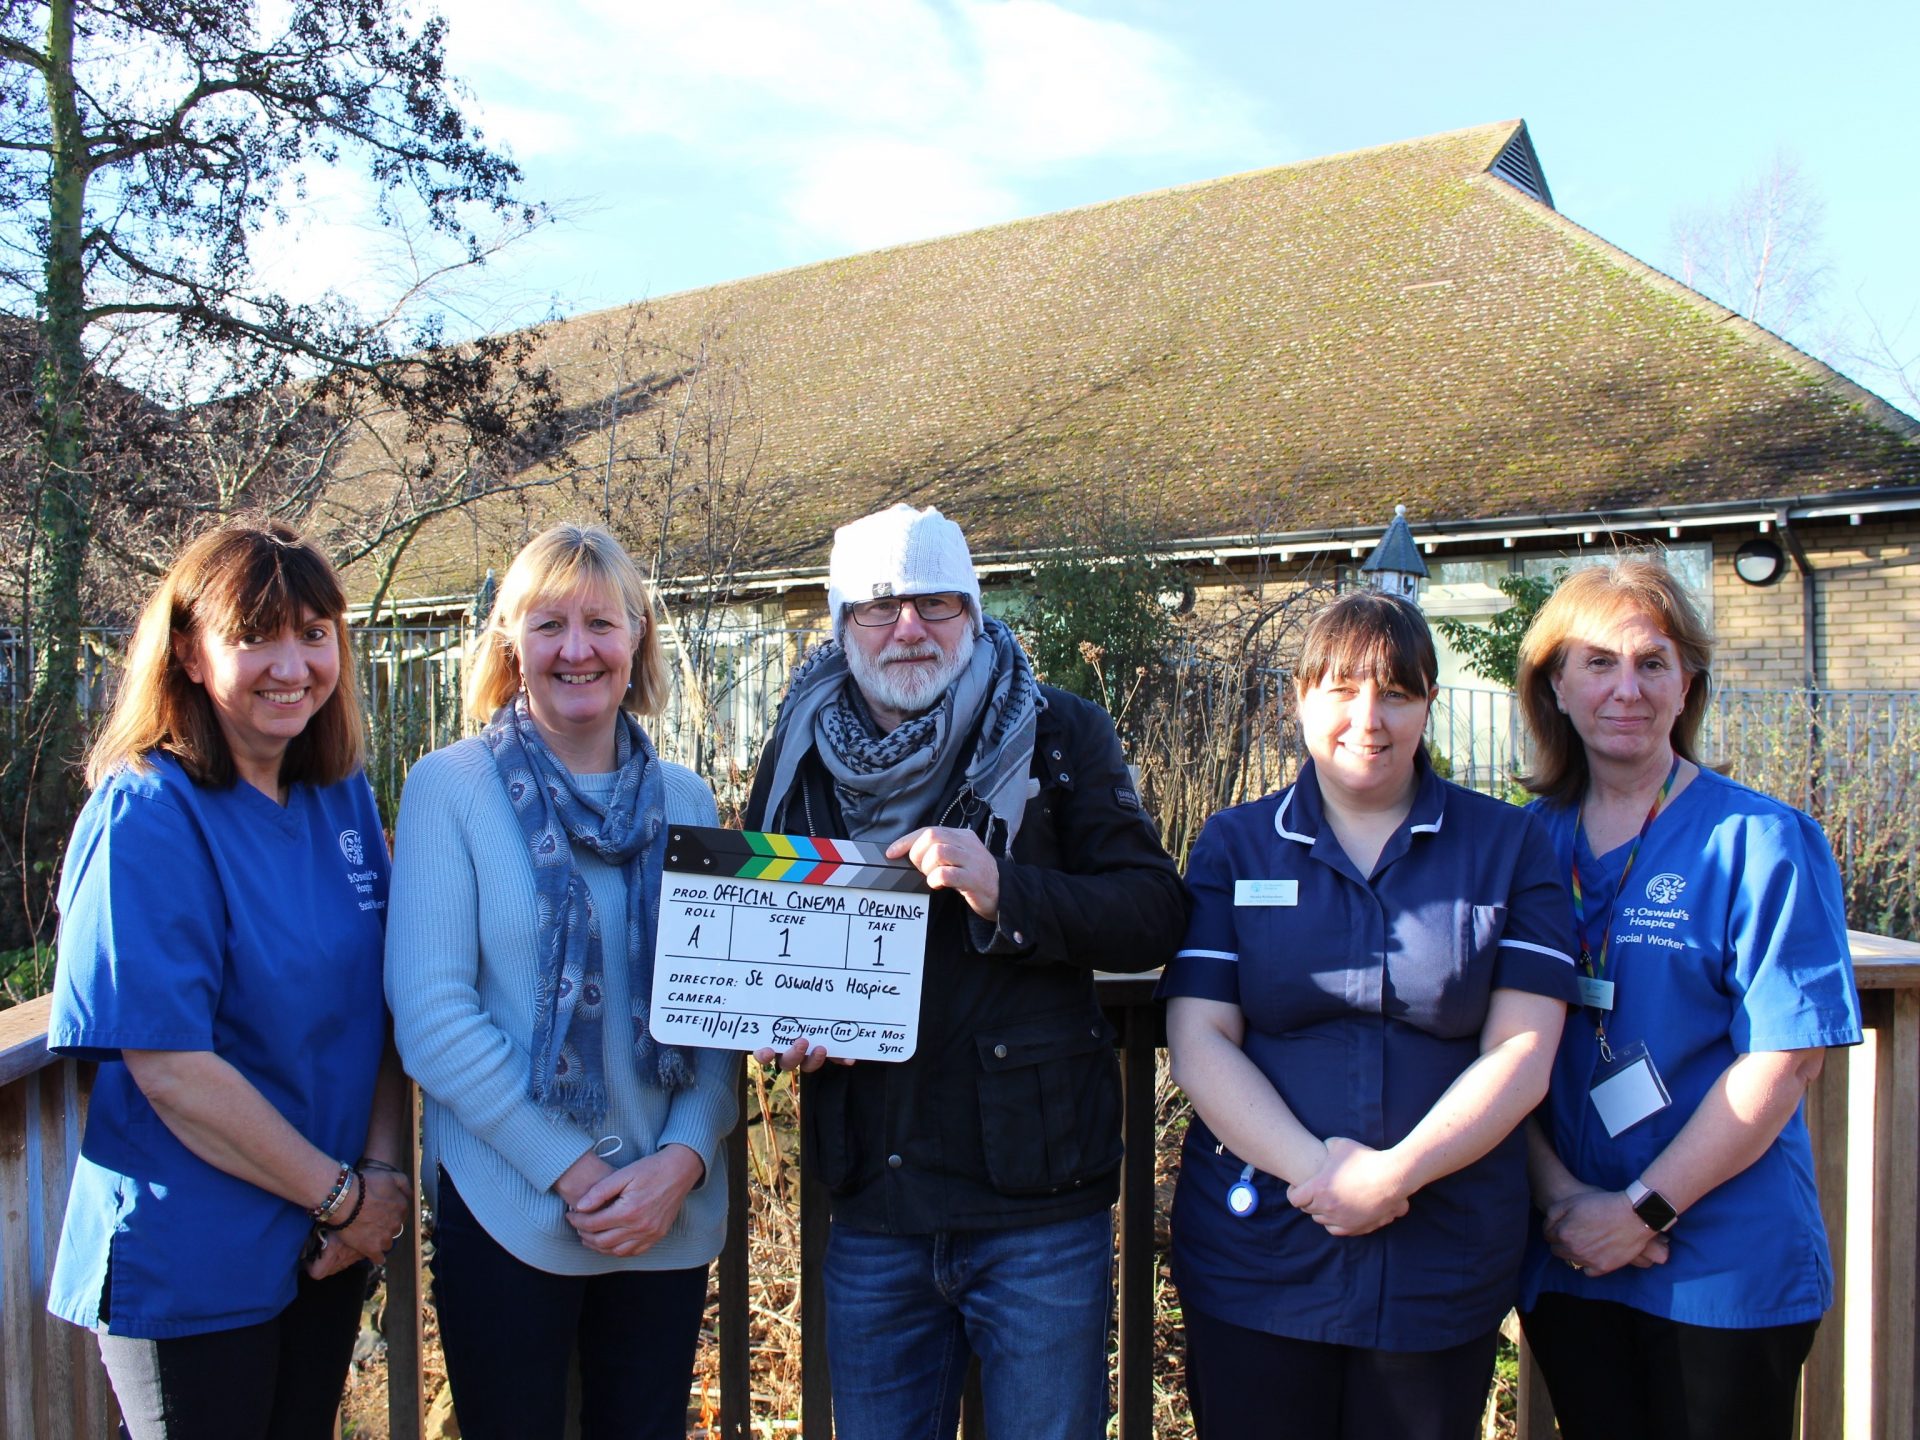 St Oswald's Hospice - Official Cinema Opening